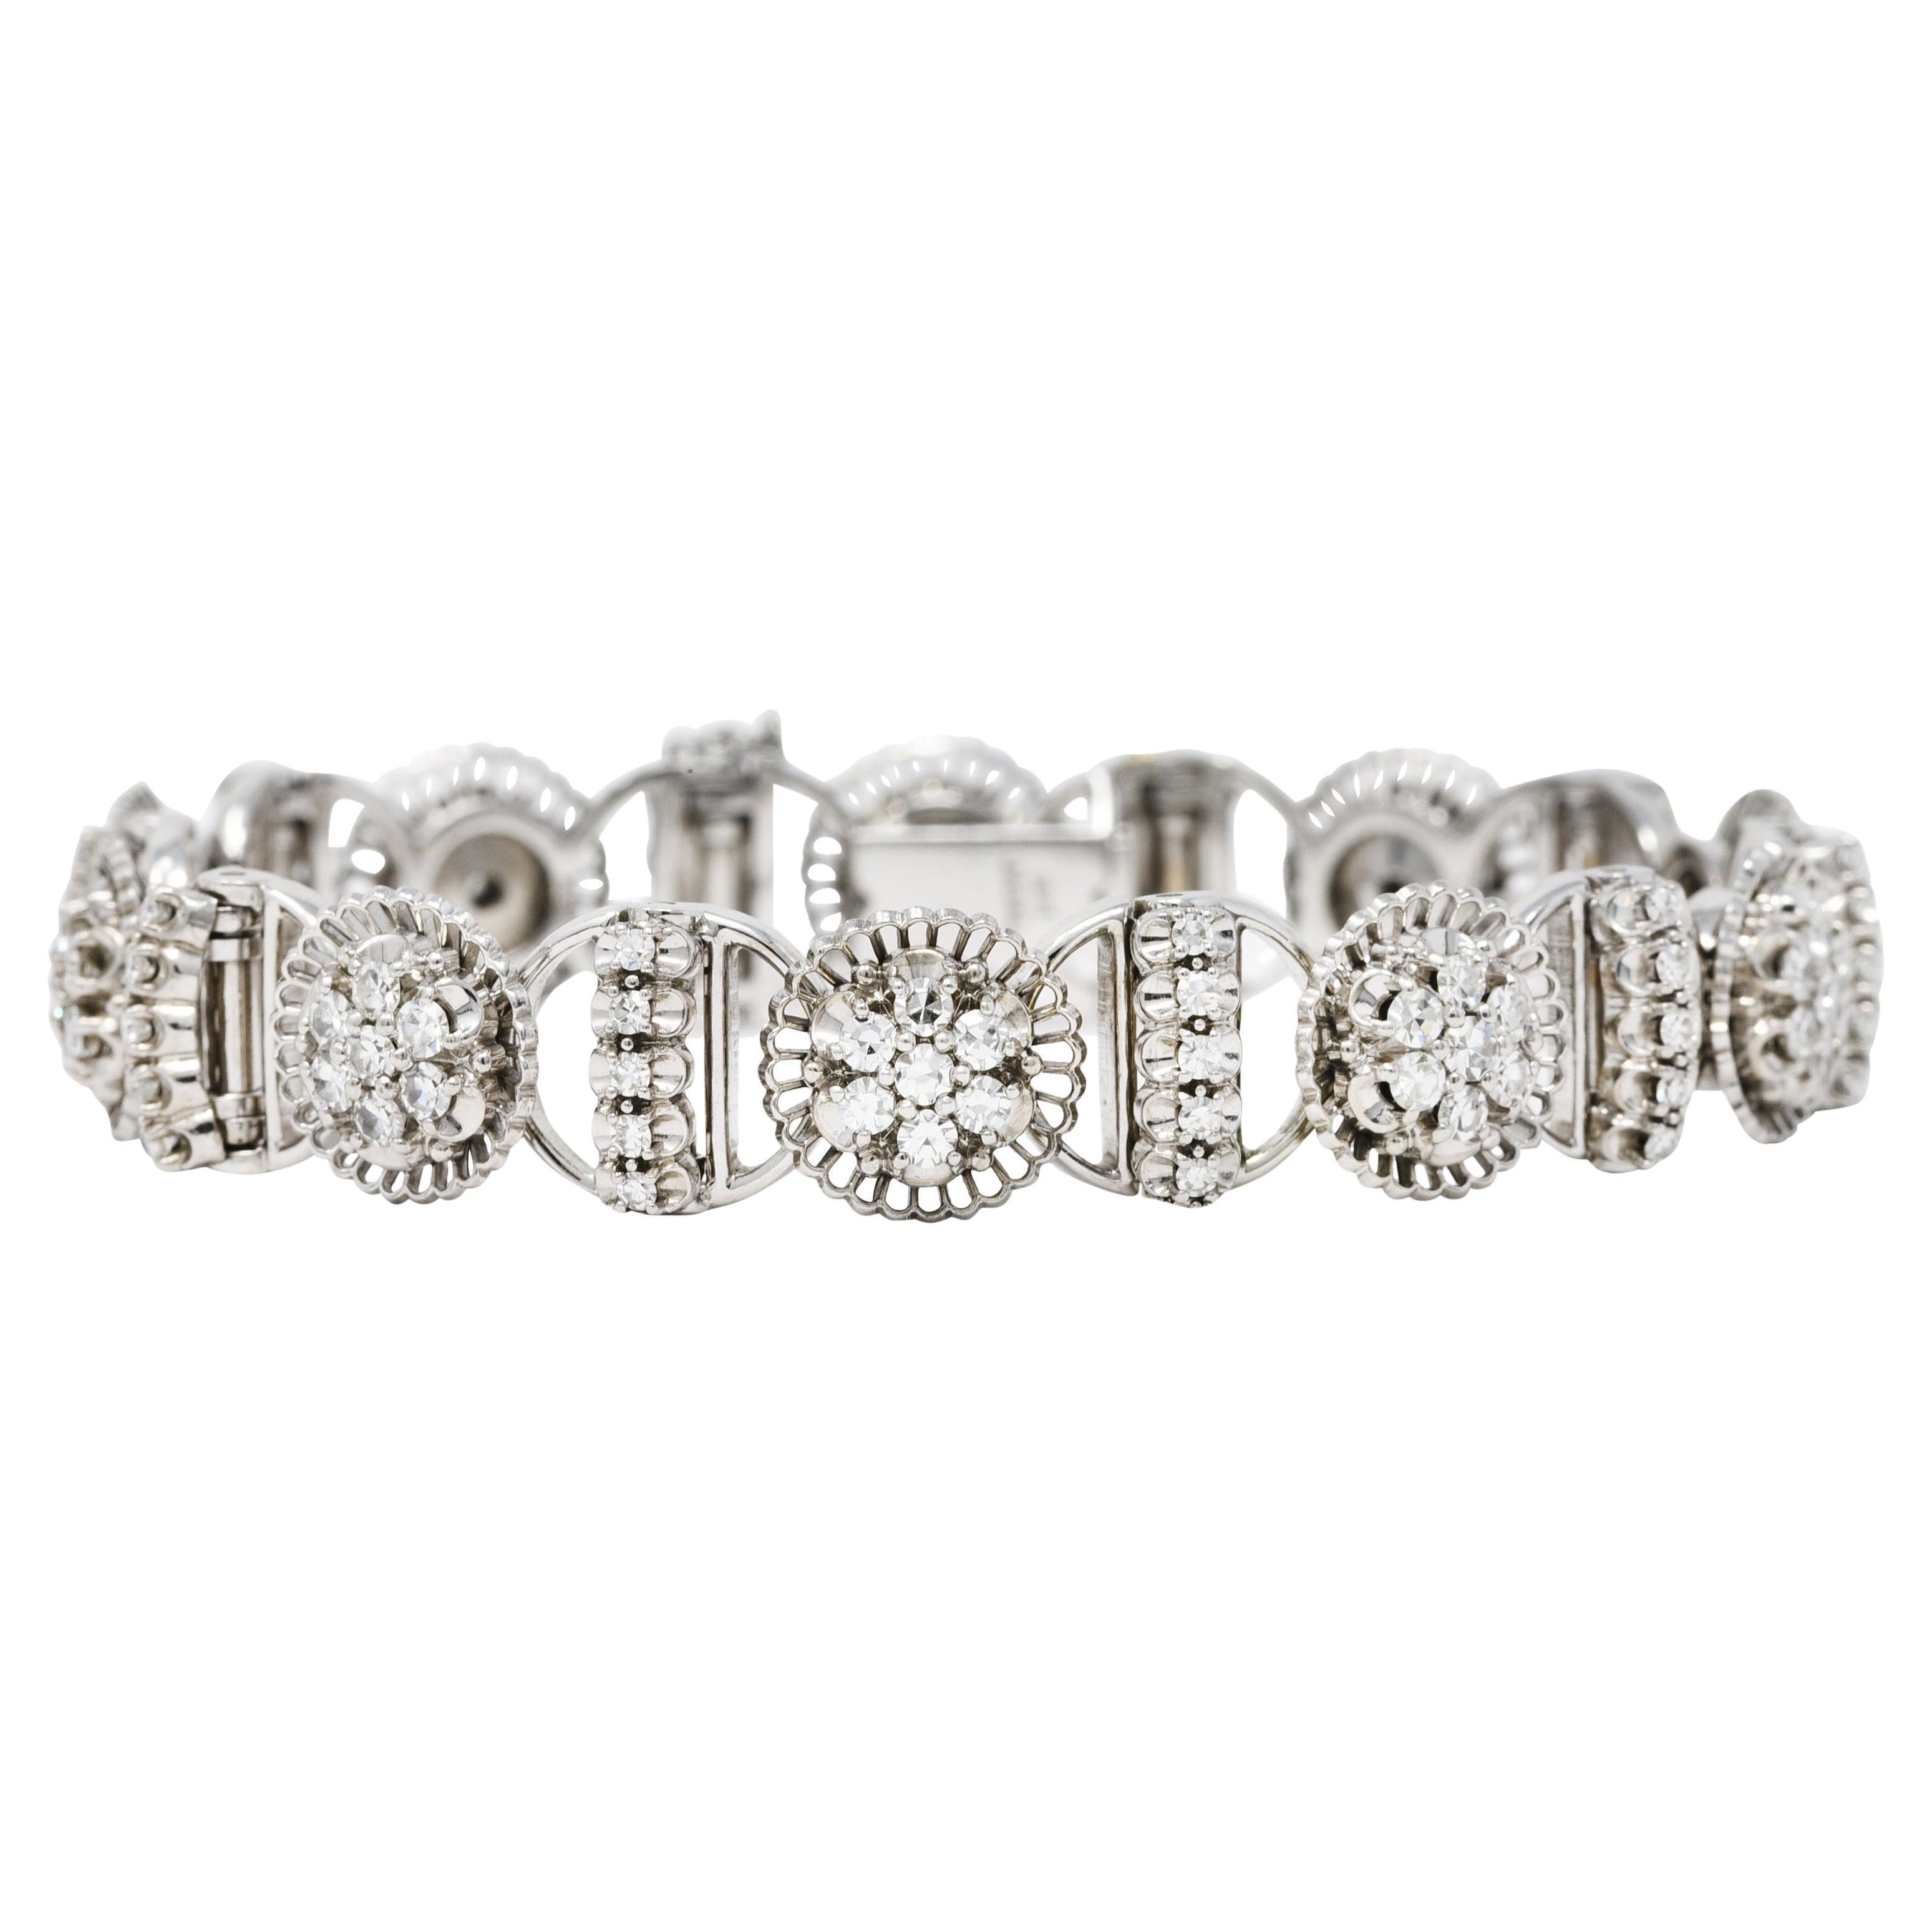 Bracelet has circular cluster links with a frilled scallop surround alternating with bar links

Belcher set throughout by single cut diamonds weighing in total approximately 3.00 carats

Very well matched with G to I color and VS clarity

Completed